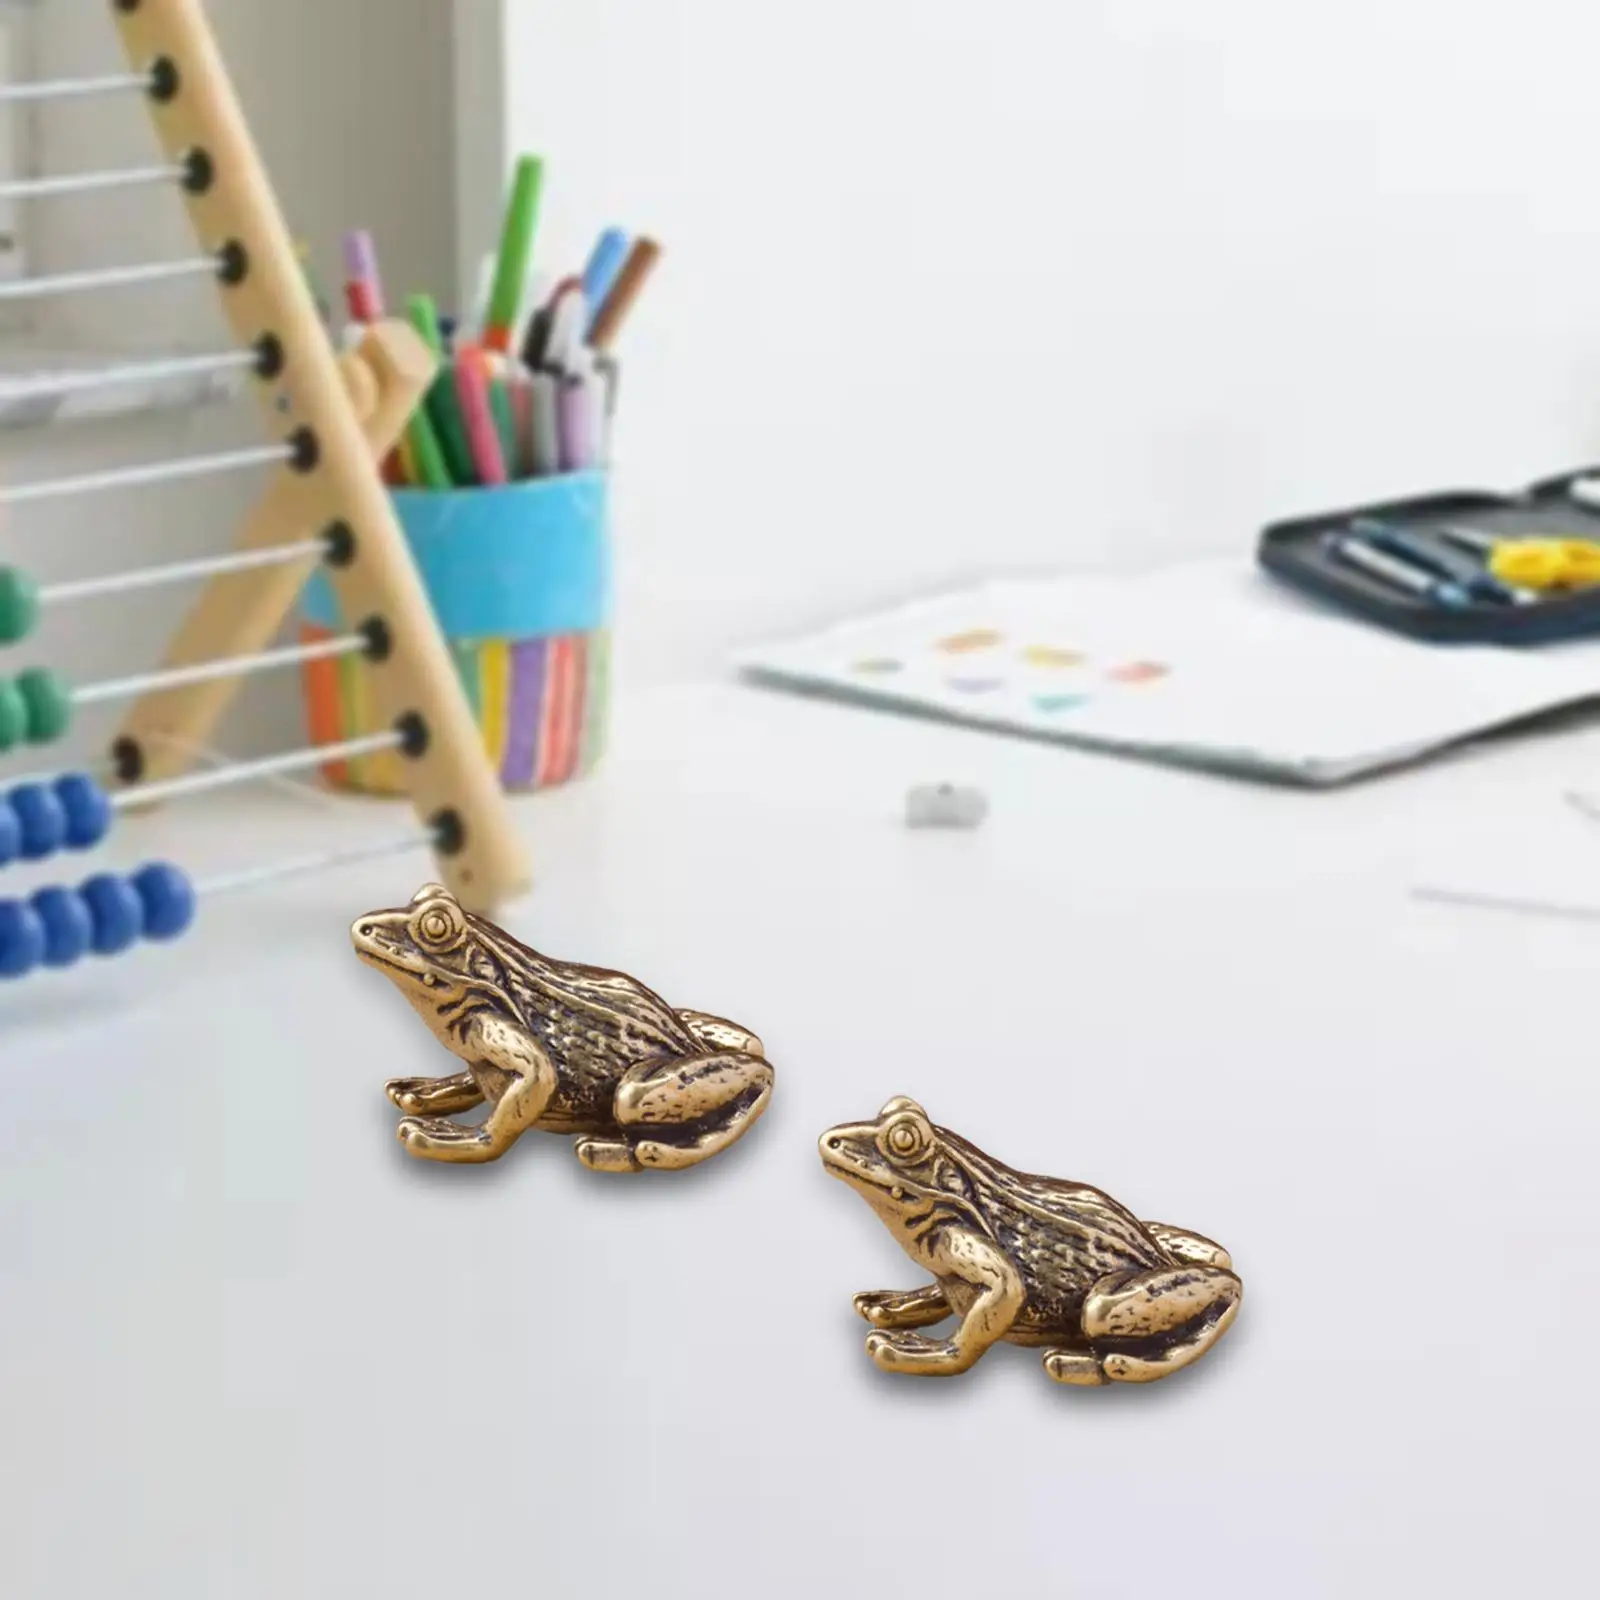 2 Pieces Brass Frog Statues Mini for Attracting Wealth Good Luck Living Room